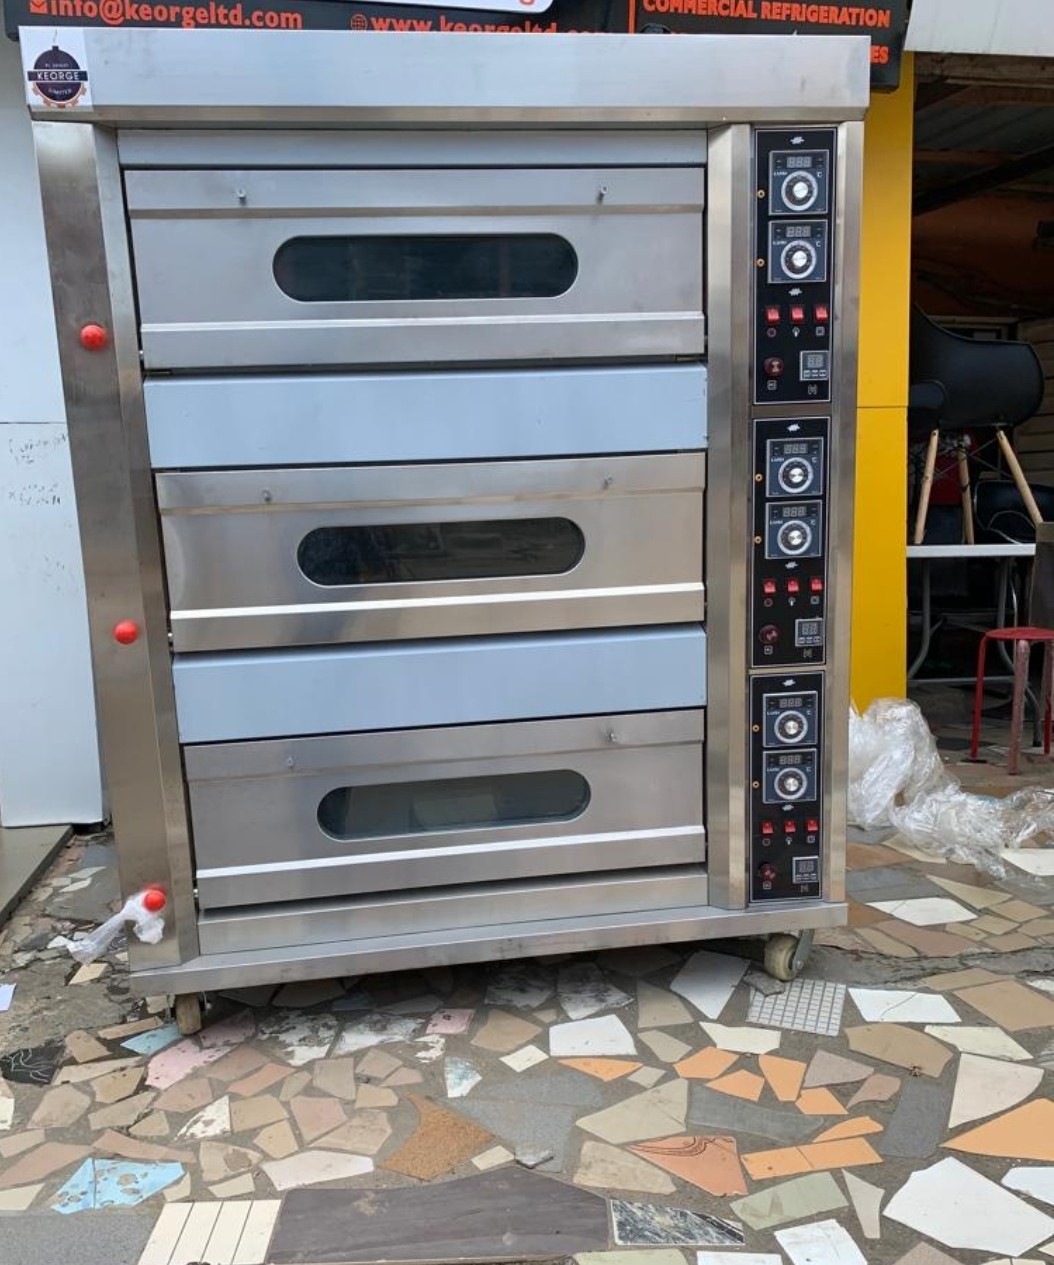 9 Tray Gas Baking Oven is available at Efritin